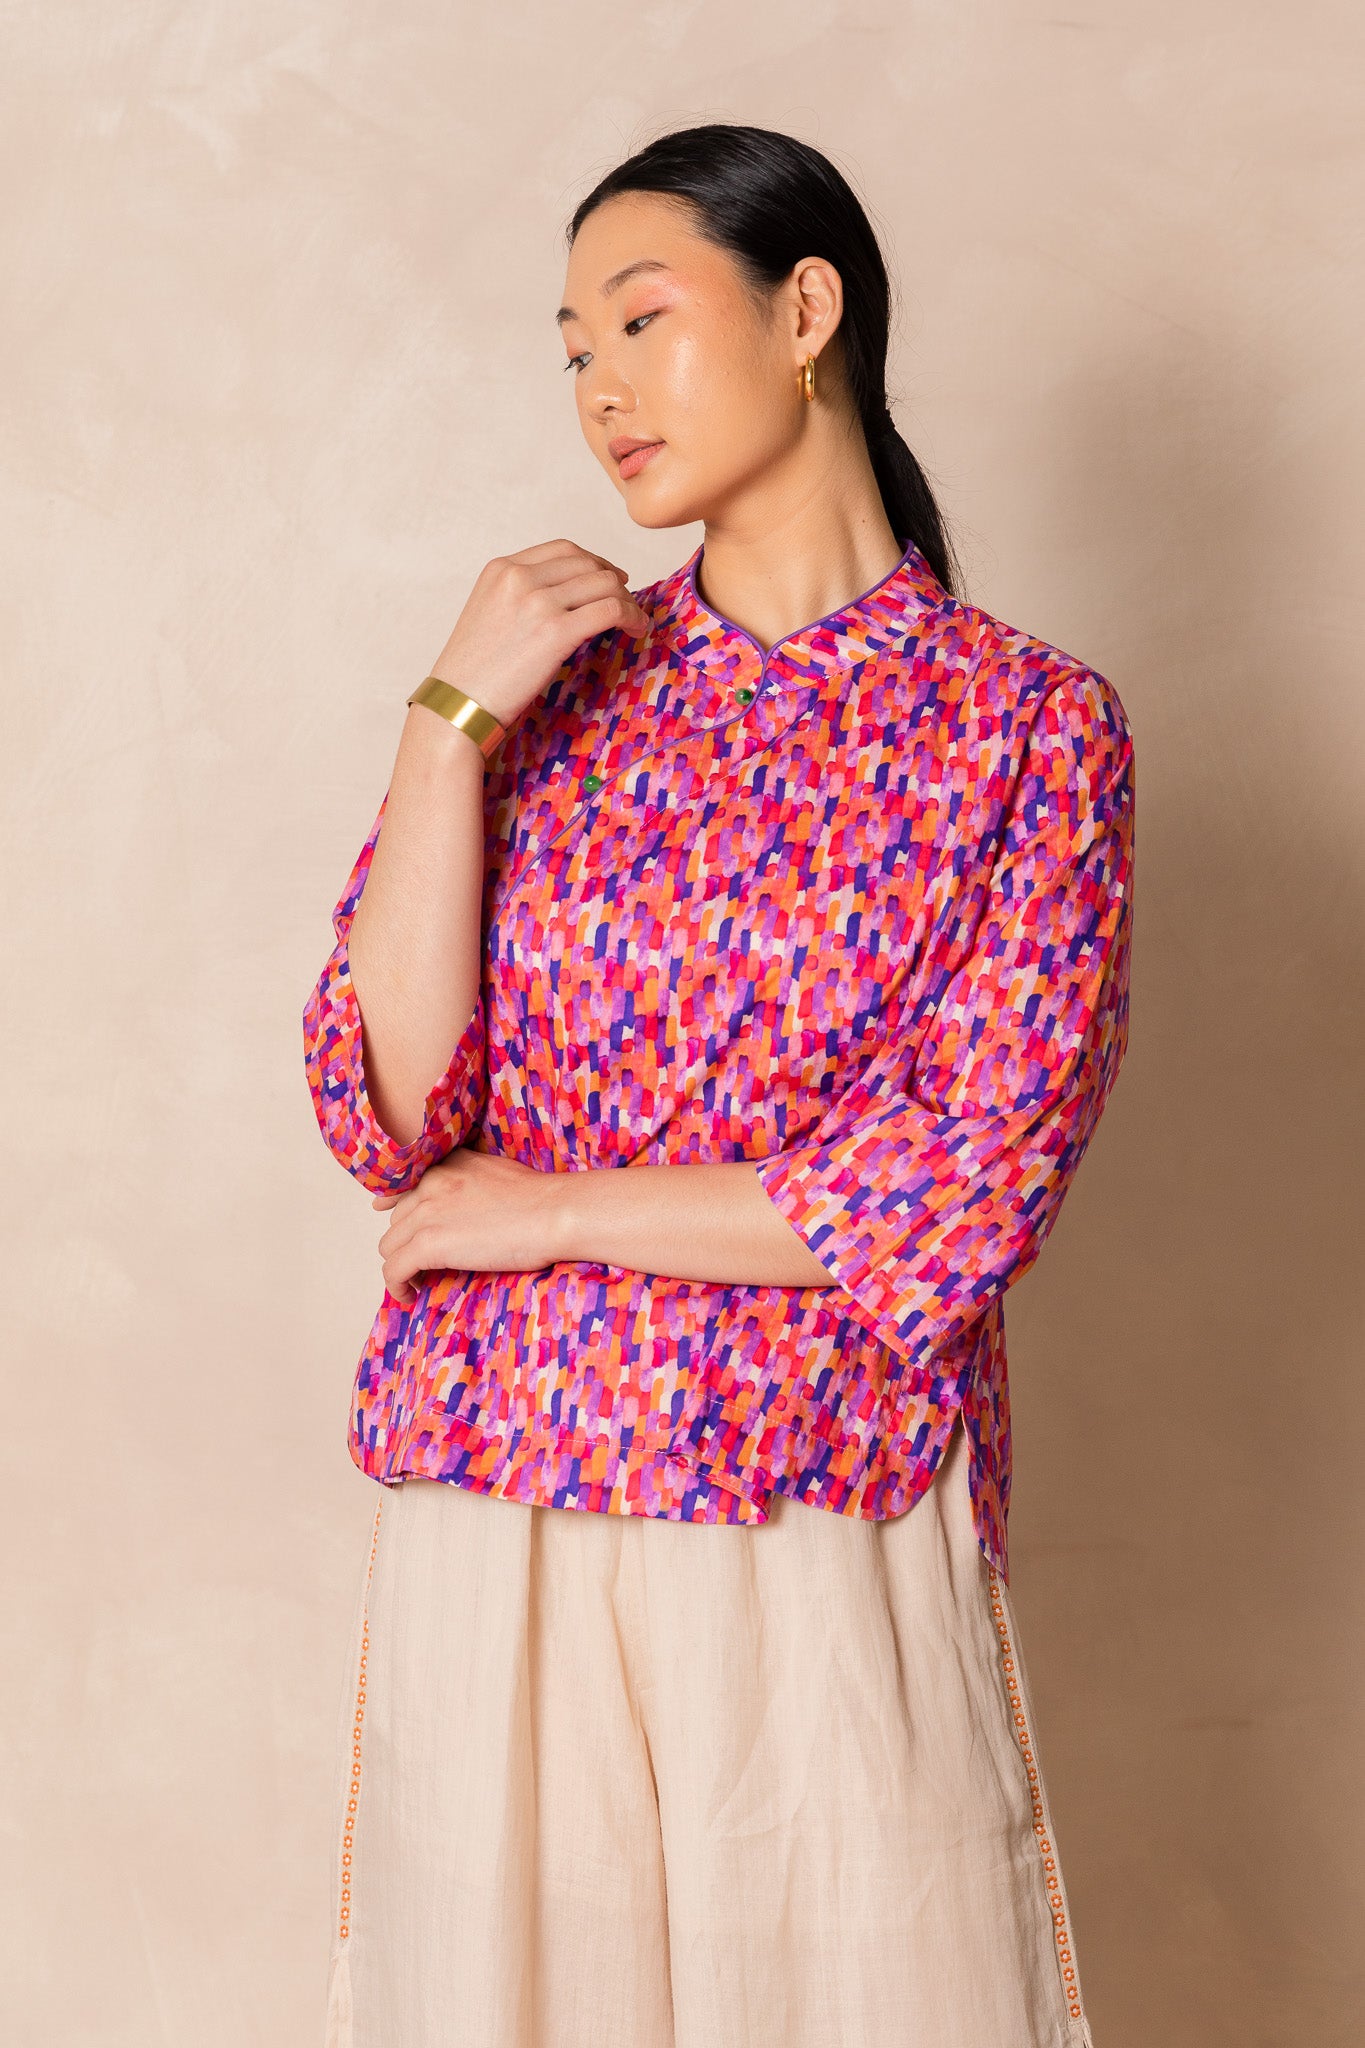 Water Colour Raindrop Print 3/4 Sleeve Cheongsam Top, available on You Living